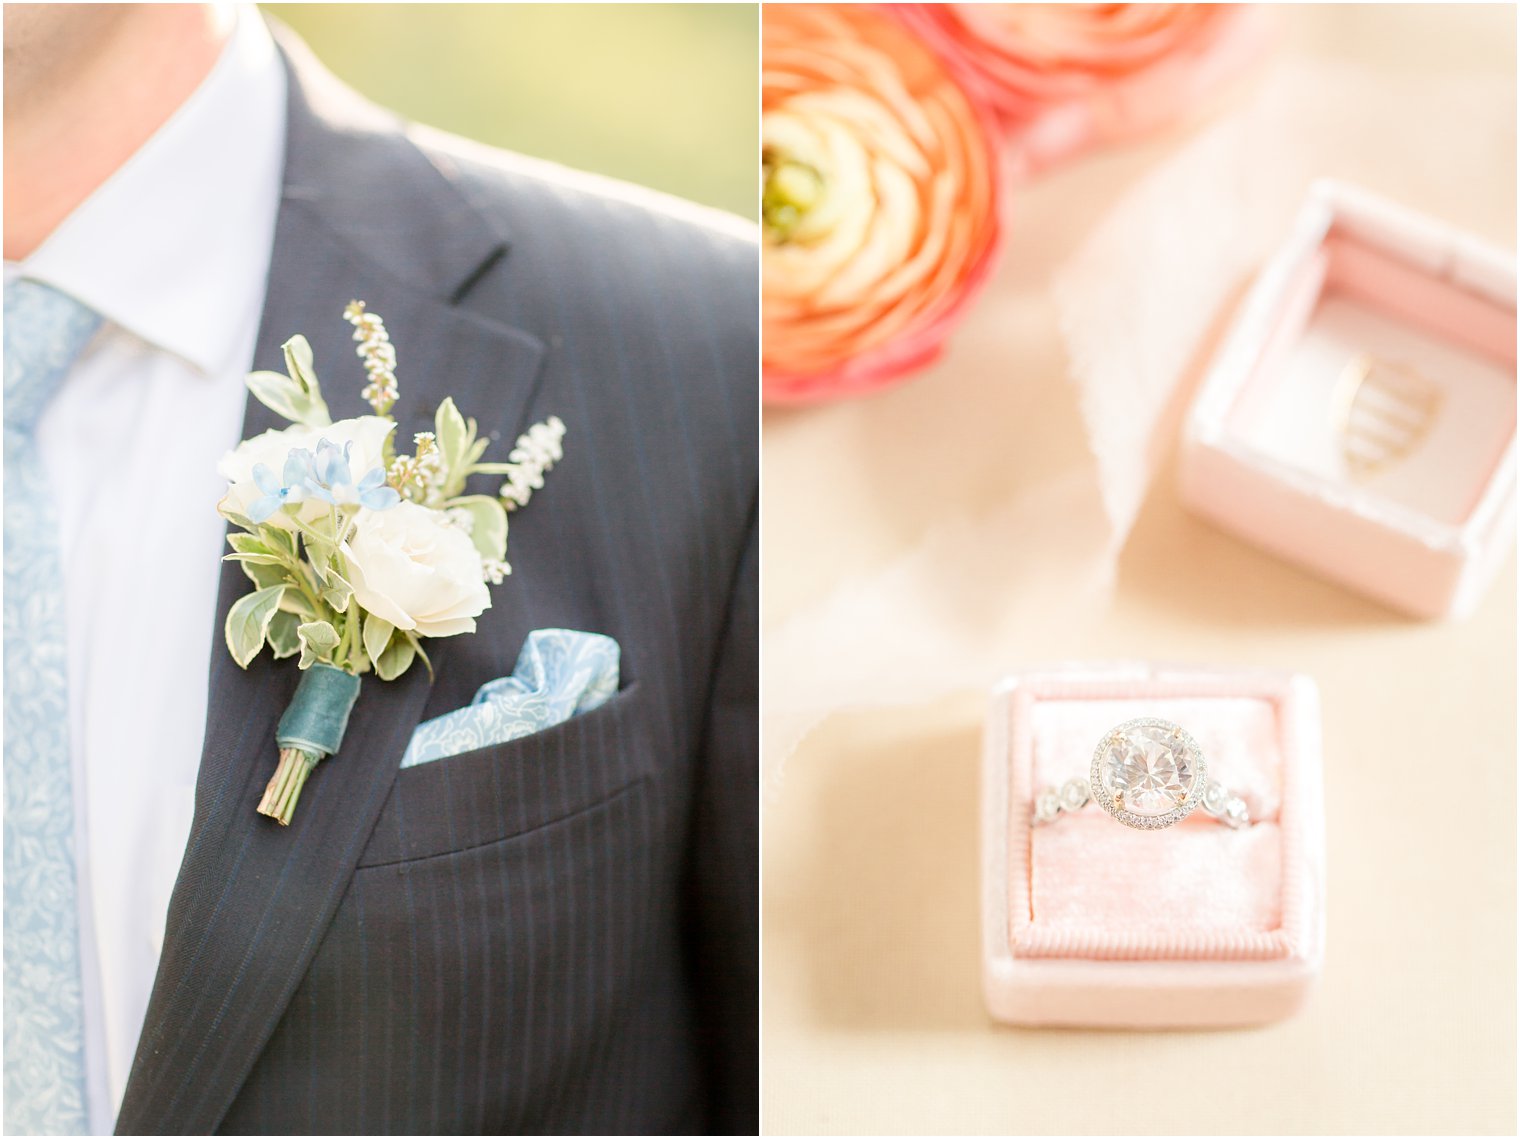 ivory boutonnière by Pink Dahlia Vintage and diamond ring from Atlantic City Jewelry photographed by Idalia Photography